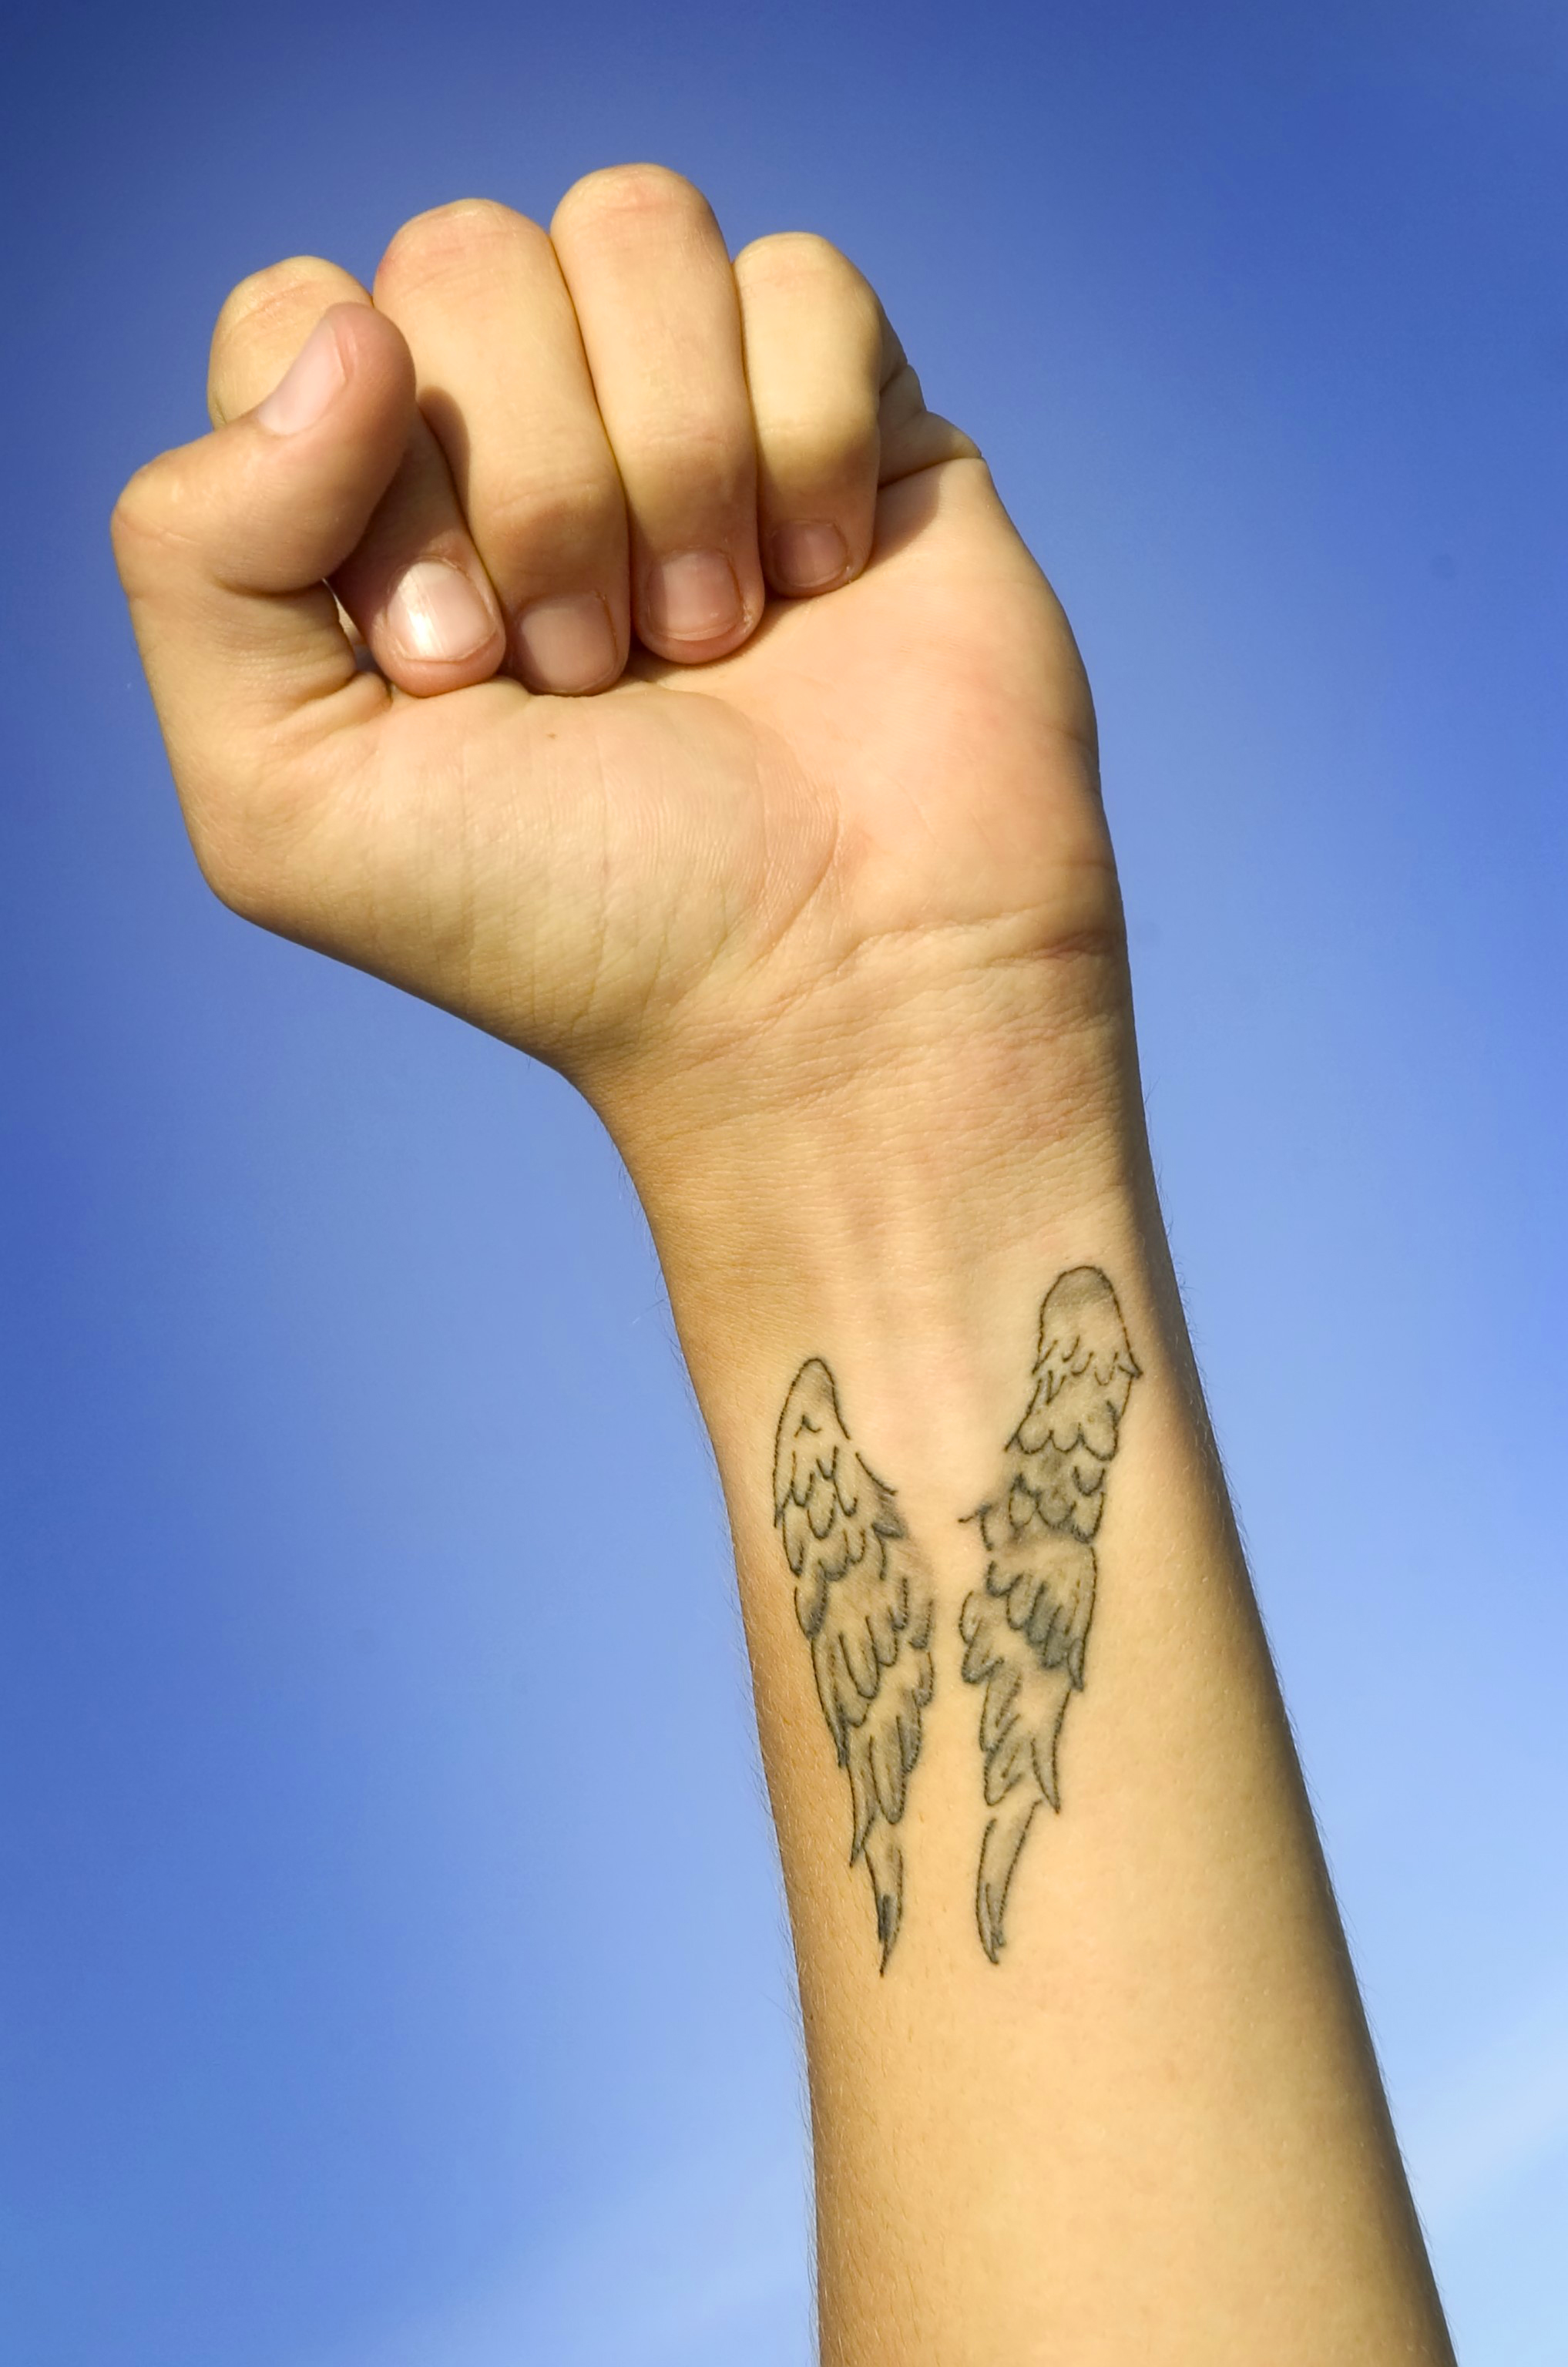 Small Tattoos Ideas for the Perfect First Tattoo  Hush Anesthetic